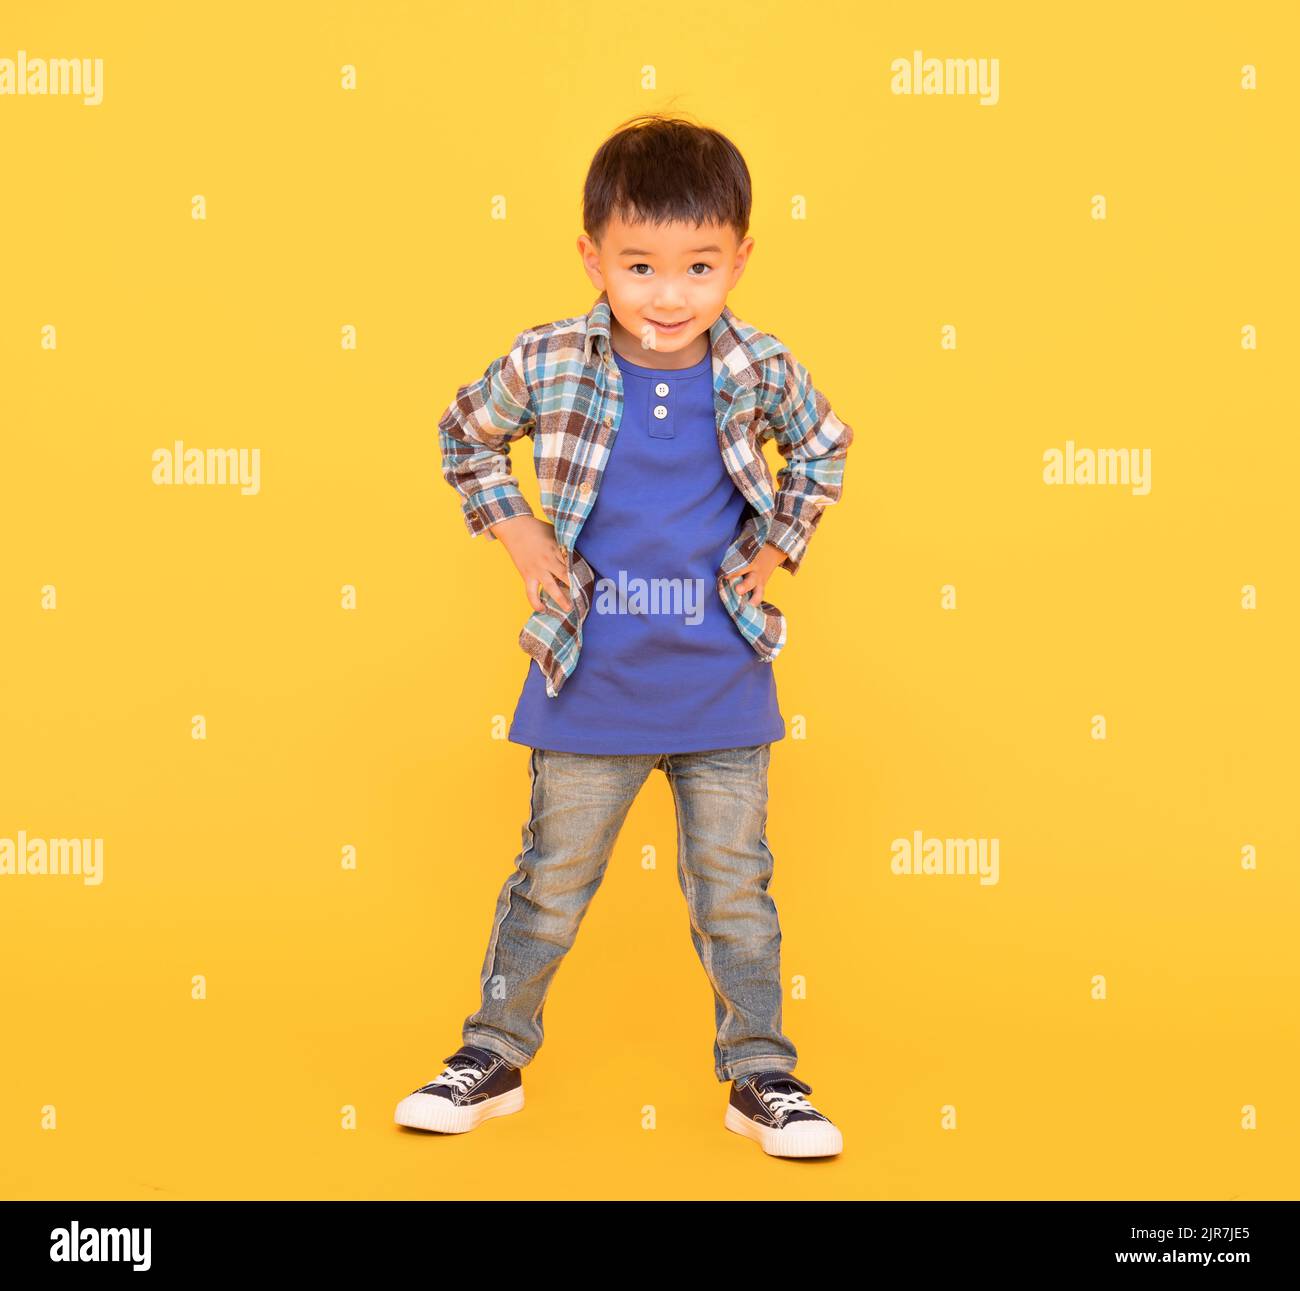 happy asian kid standing  over yellow background Stock Photo